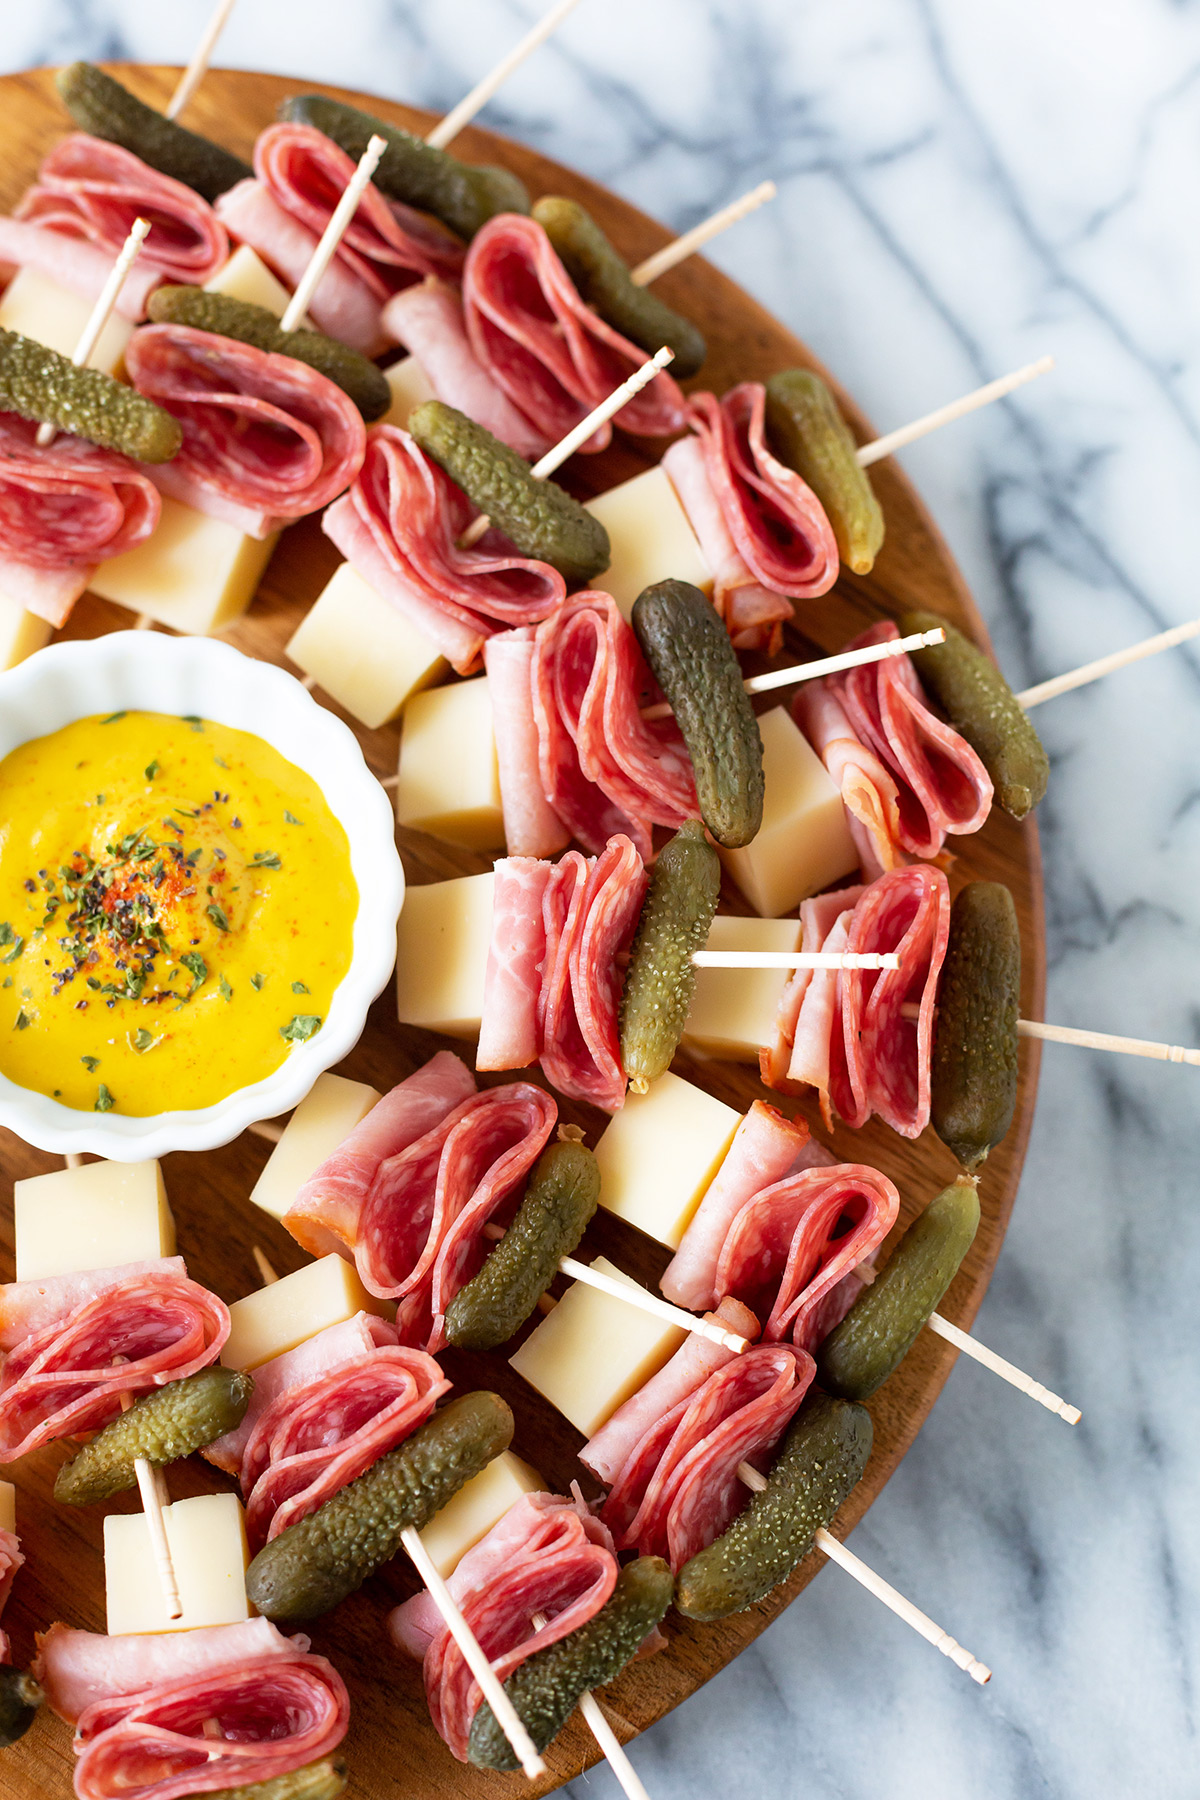 Cuban Sandwich Skewers with Mustard Dipping Sauce